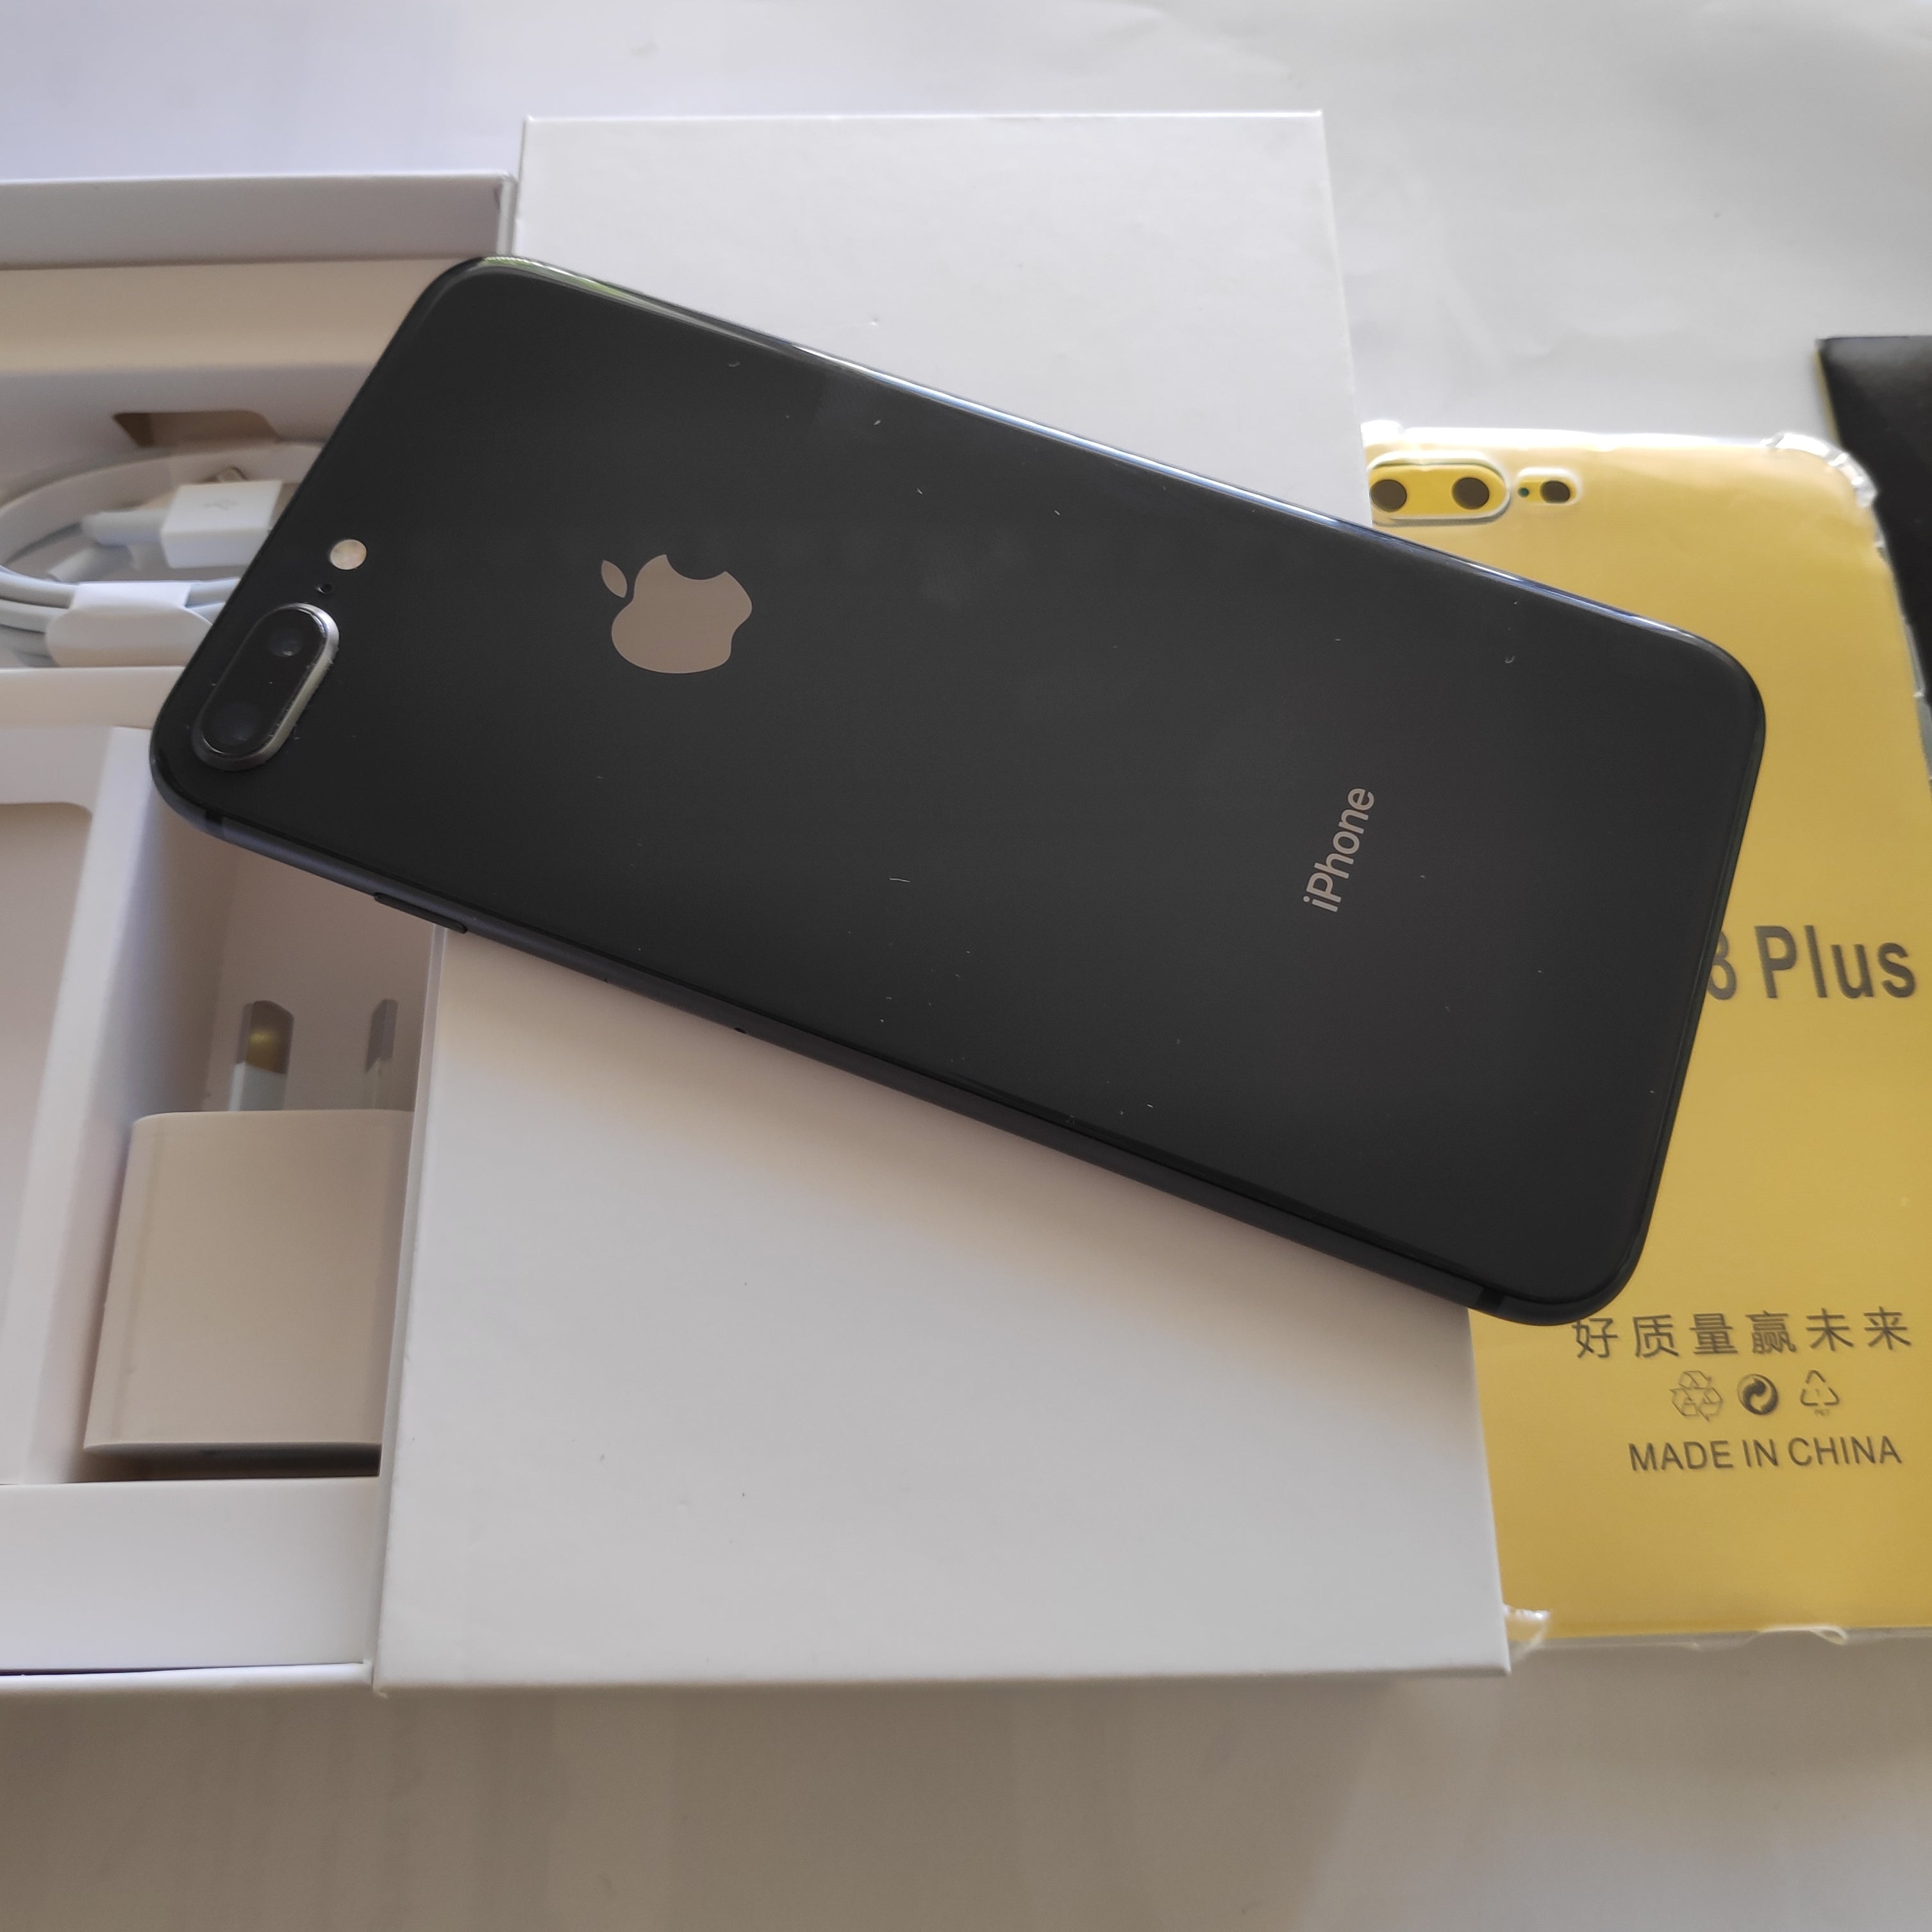 Apple iPhone 8 Plus 64GB Space Grey (Excellent) With Case, Screen Protector & Shipping